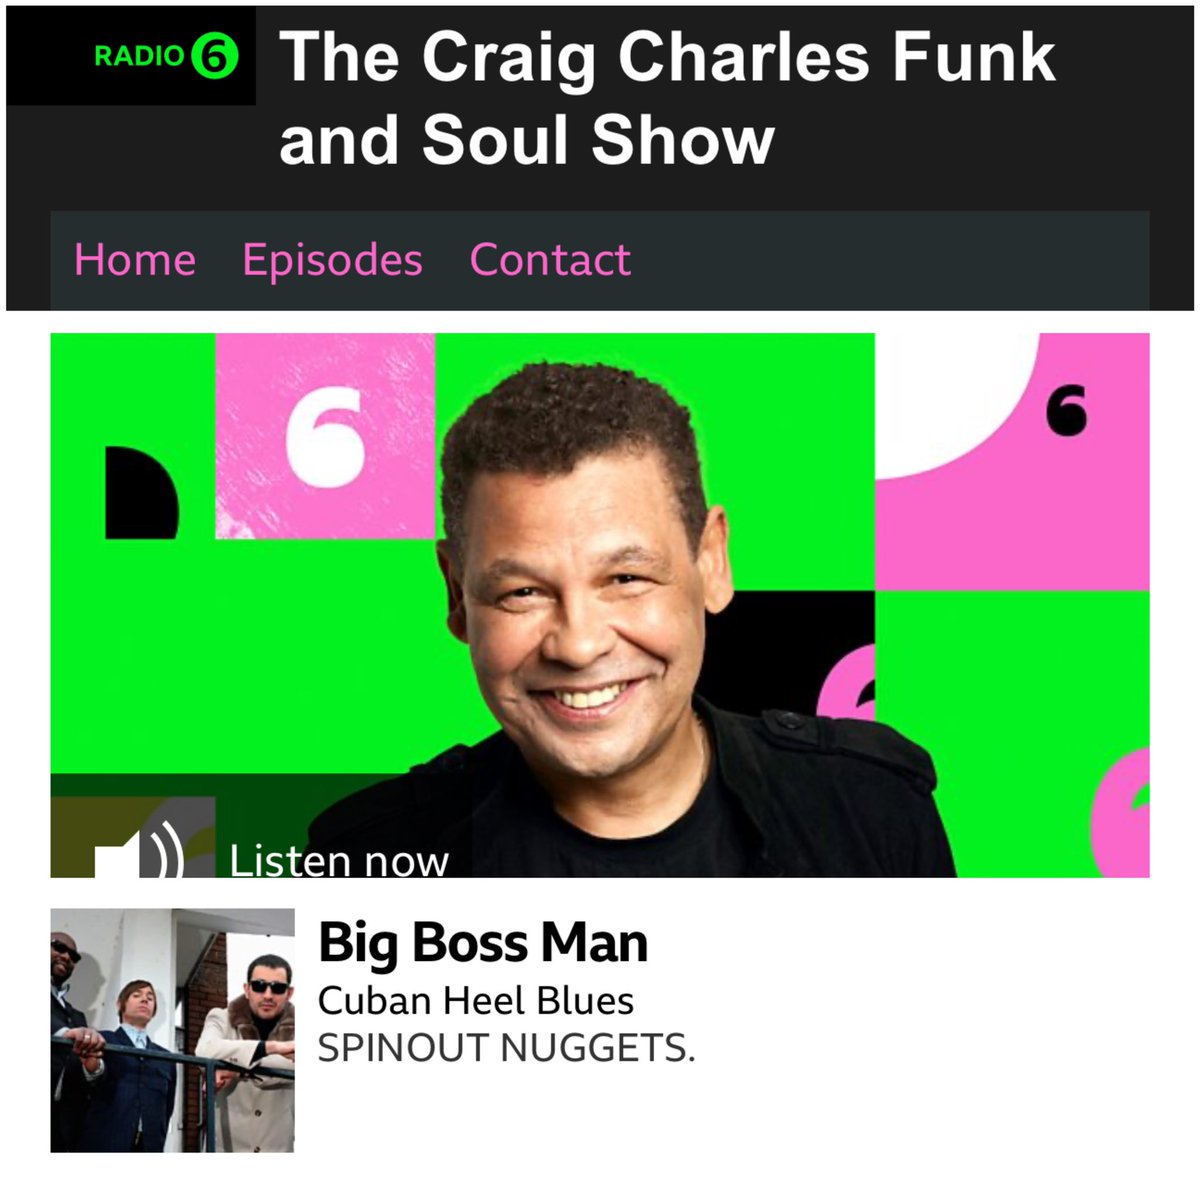 Many thanks to @CCfunkandsoul for playing @BigBossManMusic ’s ‘Cuban Heel Blues’ on the Craig Charles Funk & Soul Show on BBC6 Music on Saturday. The track is from their new album ‘Bossin’ Around’. Listen to the whole show here - bbc.co.uk/sounds/play/m0…